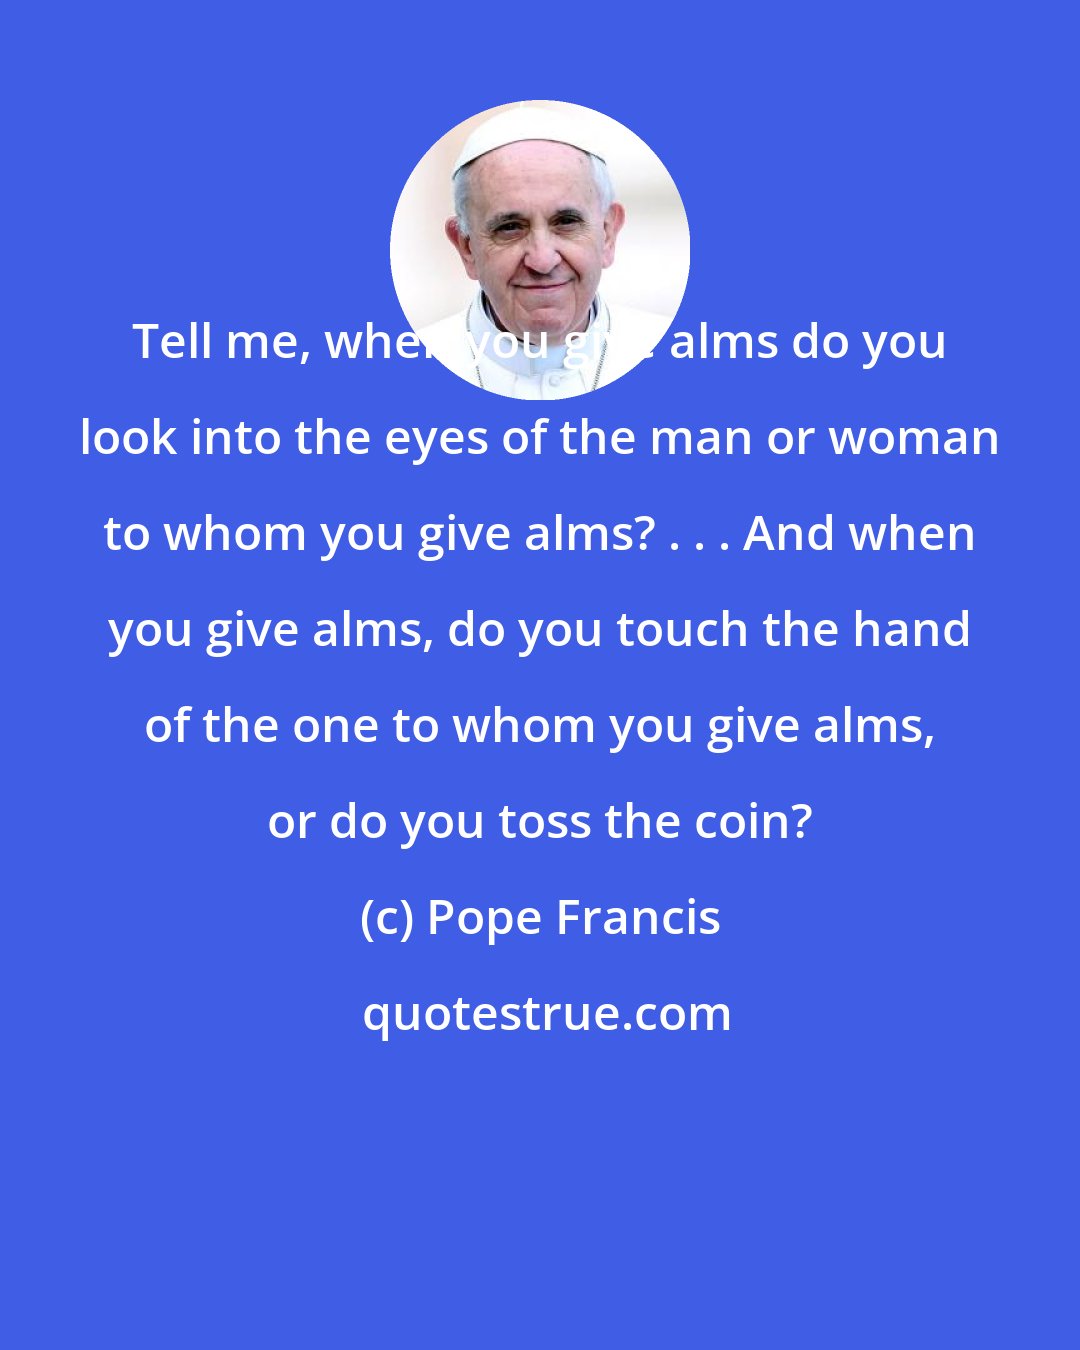 Pope Francis: Tell me, when you give alms do you look into the eyes of the man or woman to whom you give alms? . . . And when you give alms, do you touch the hand of the one to whom you give alms, or do you toss the coin?